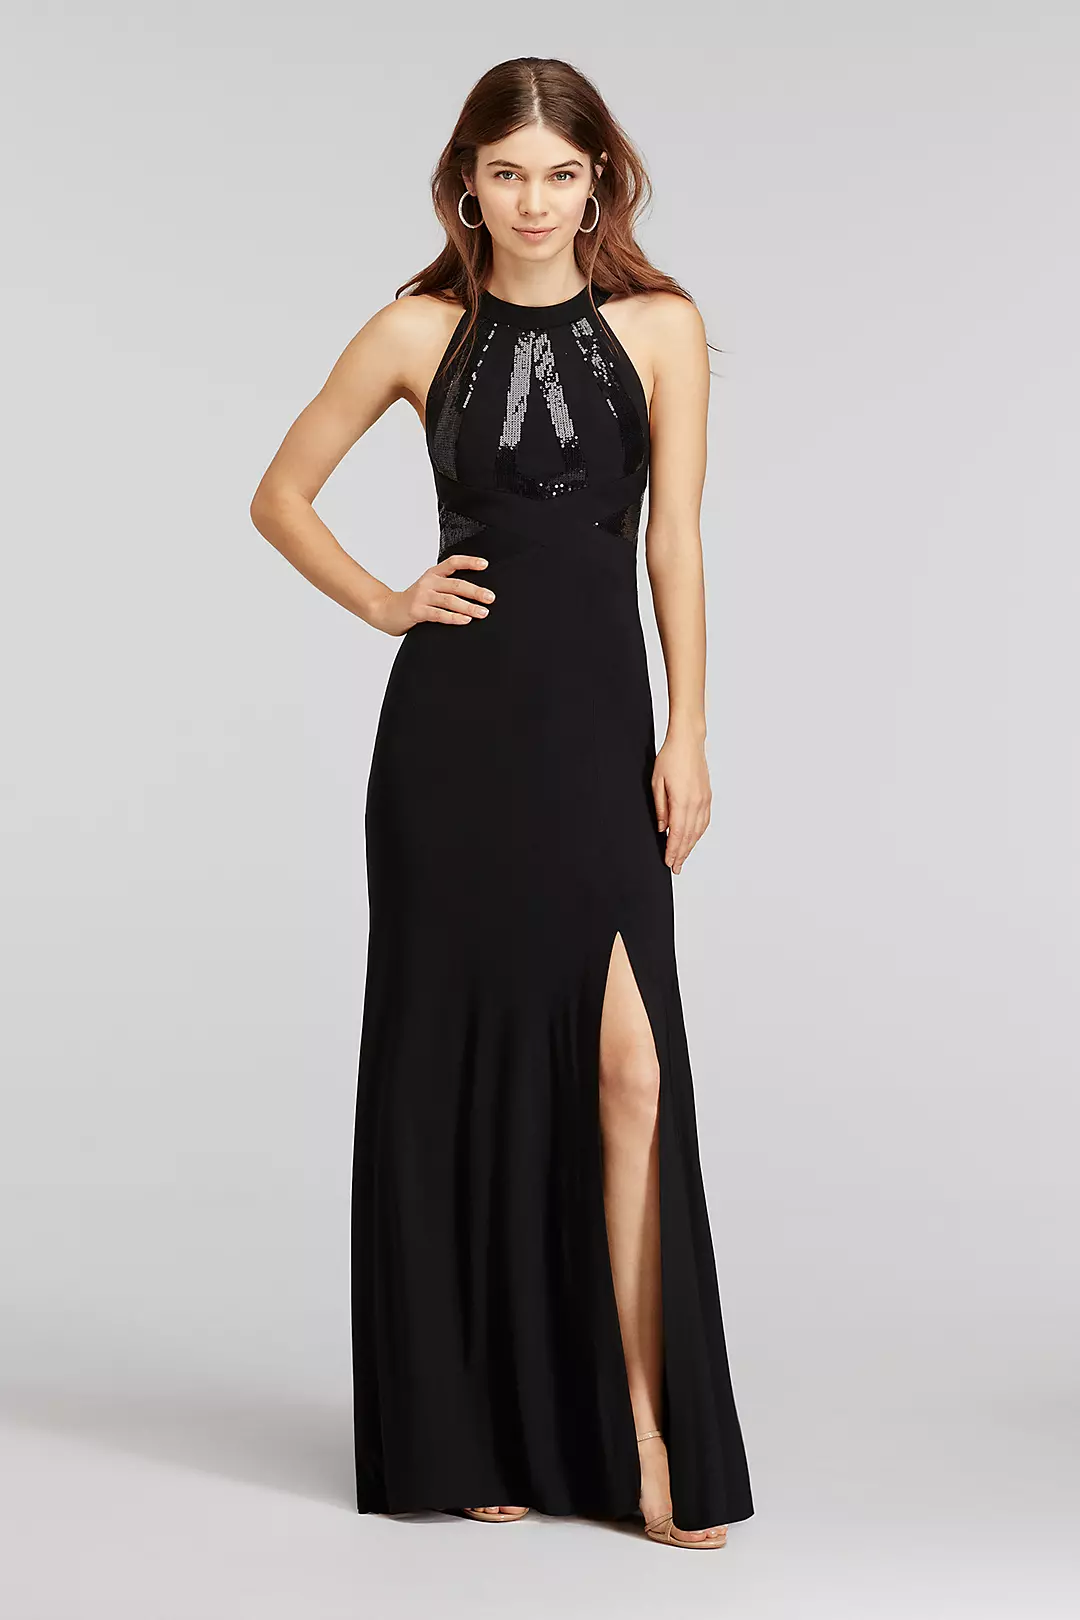 Sequin Halter Jersey Dress with and Open Back Image